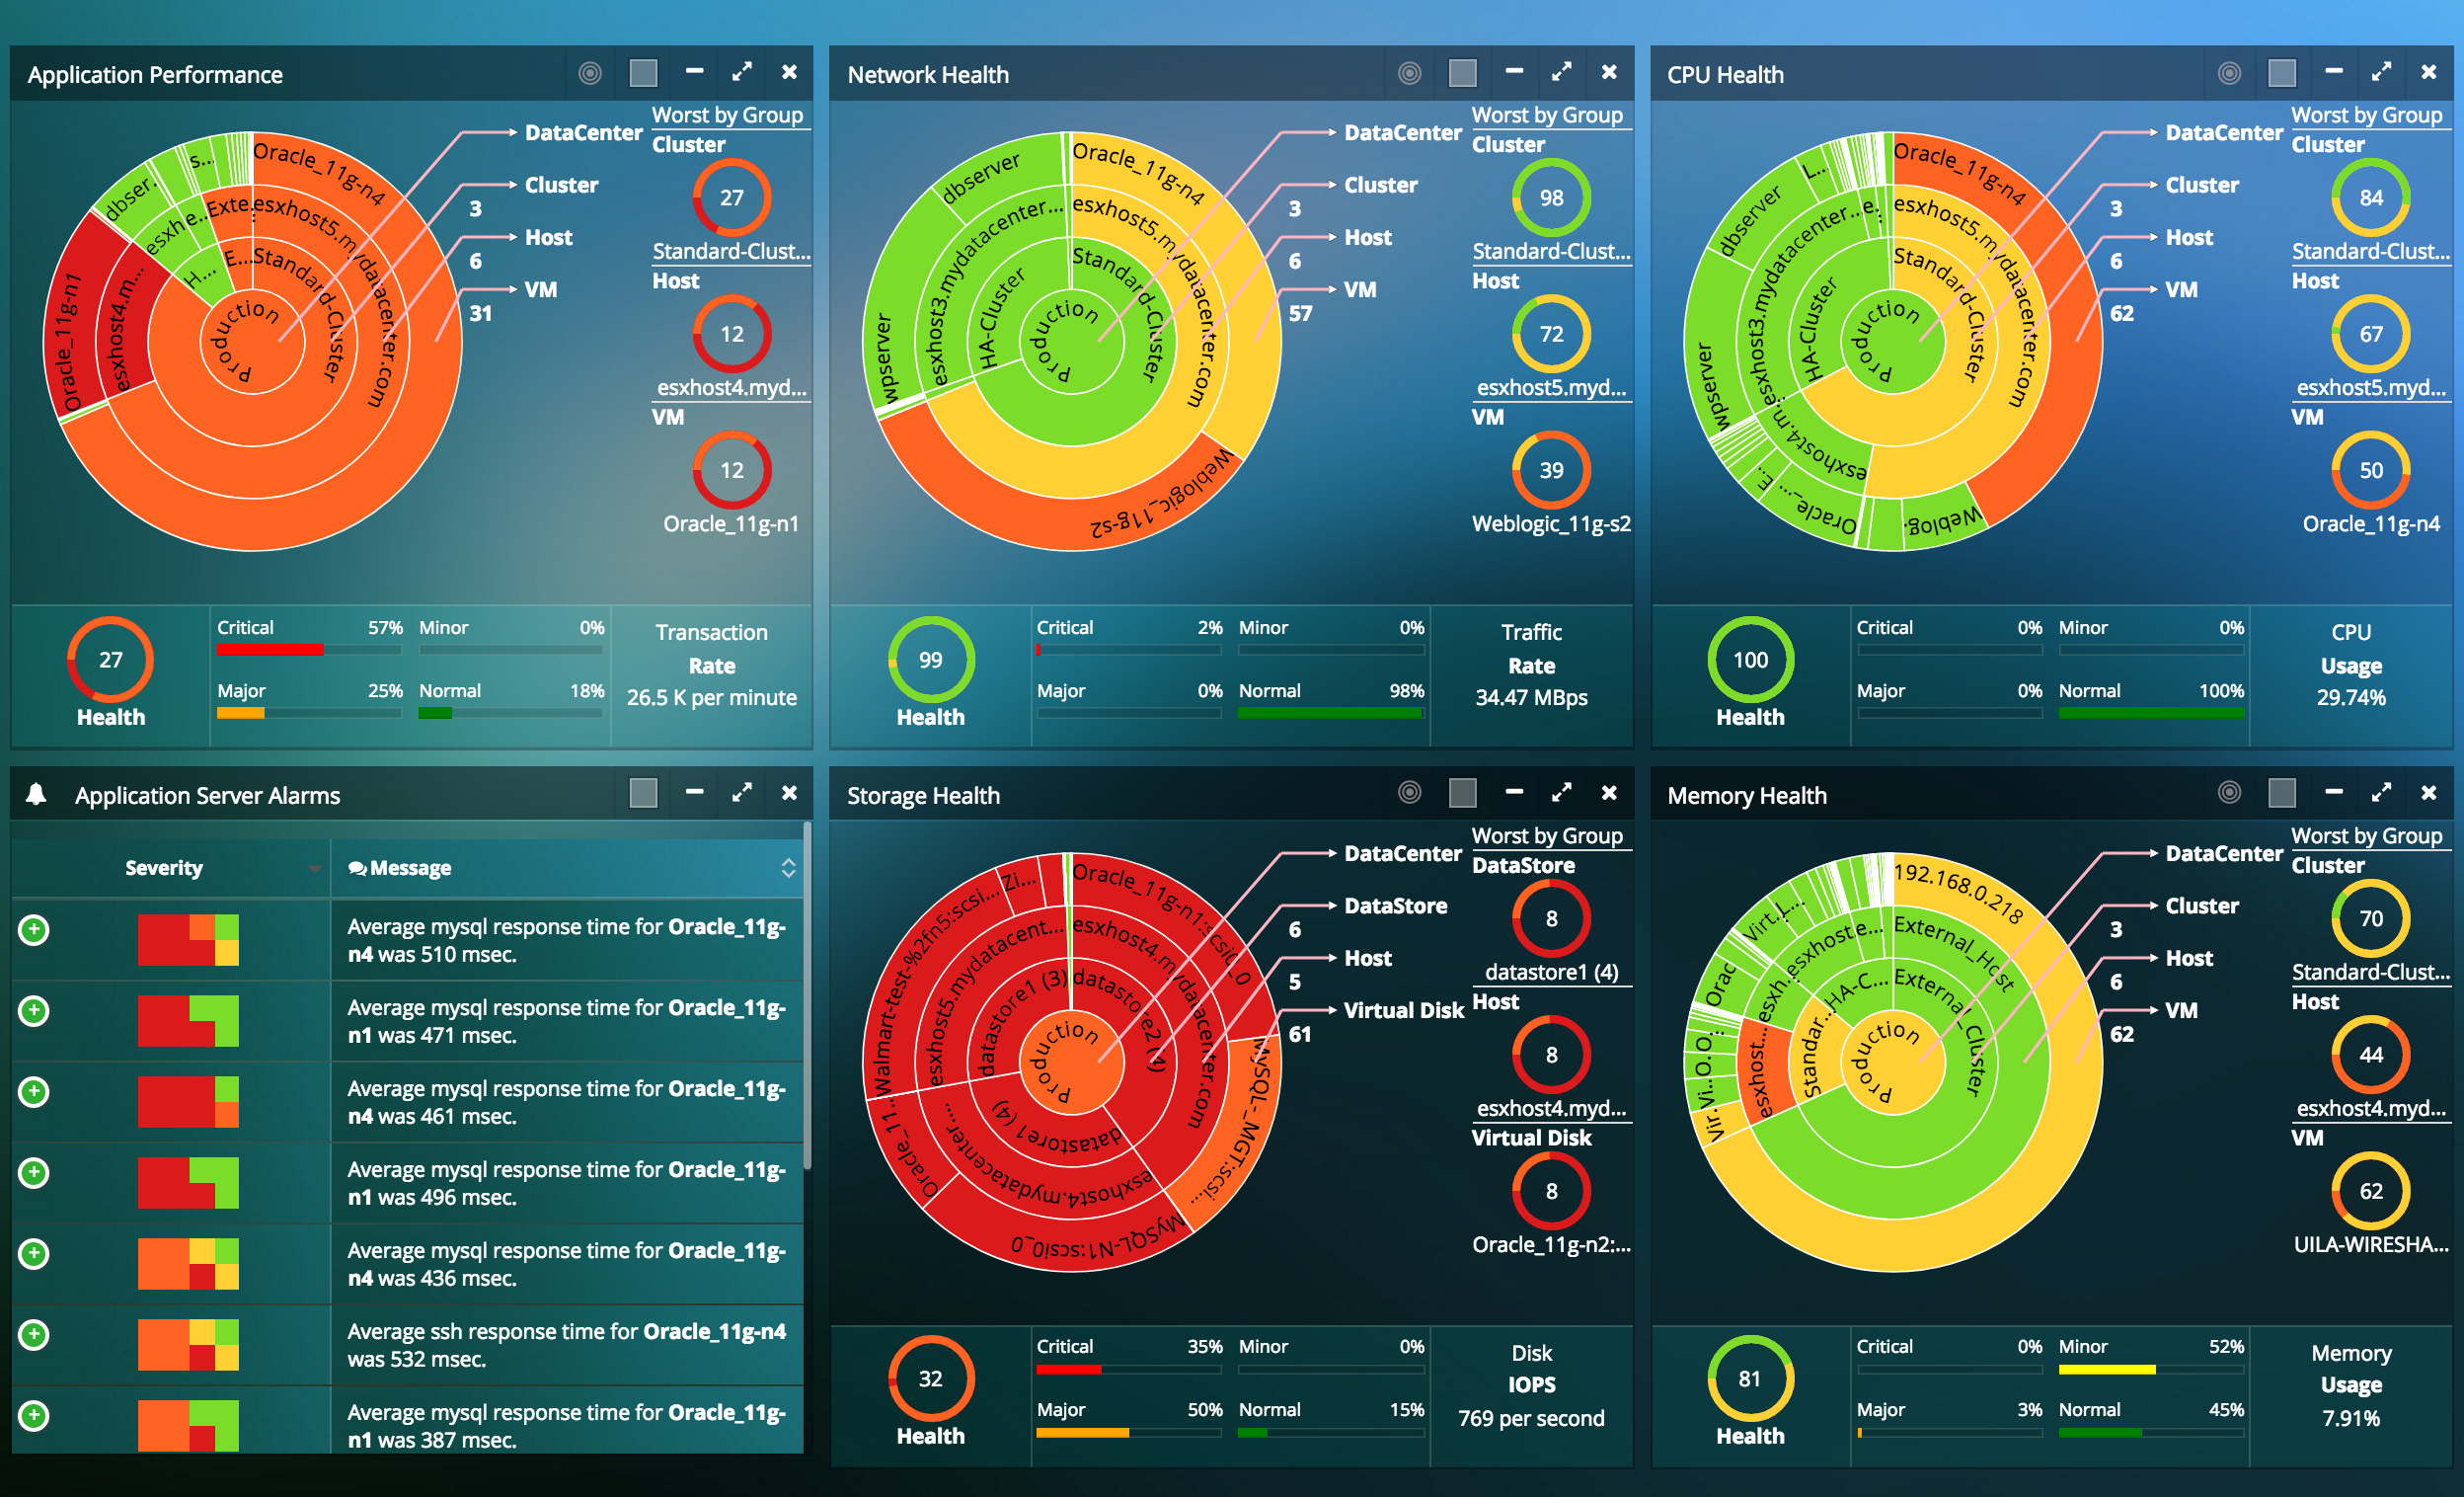 Uila's Application-Centric Infrastructure Monitoring & Analytics Dashboard